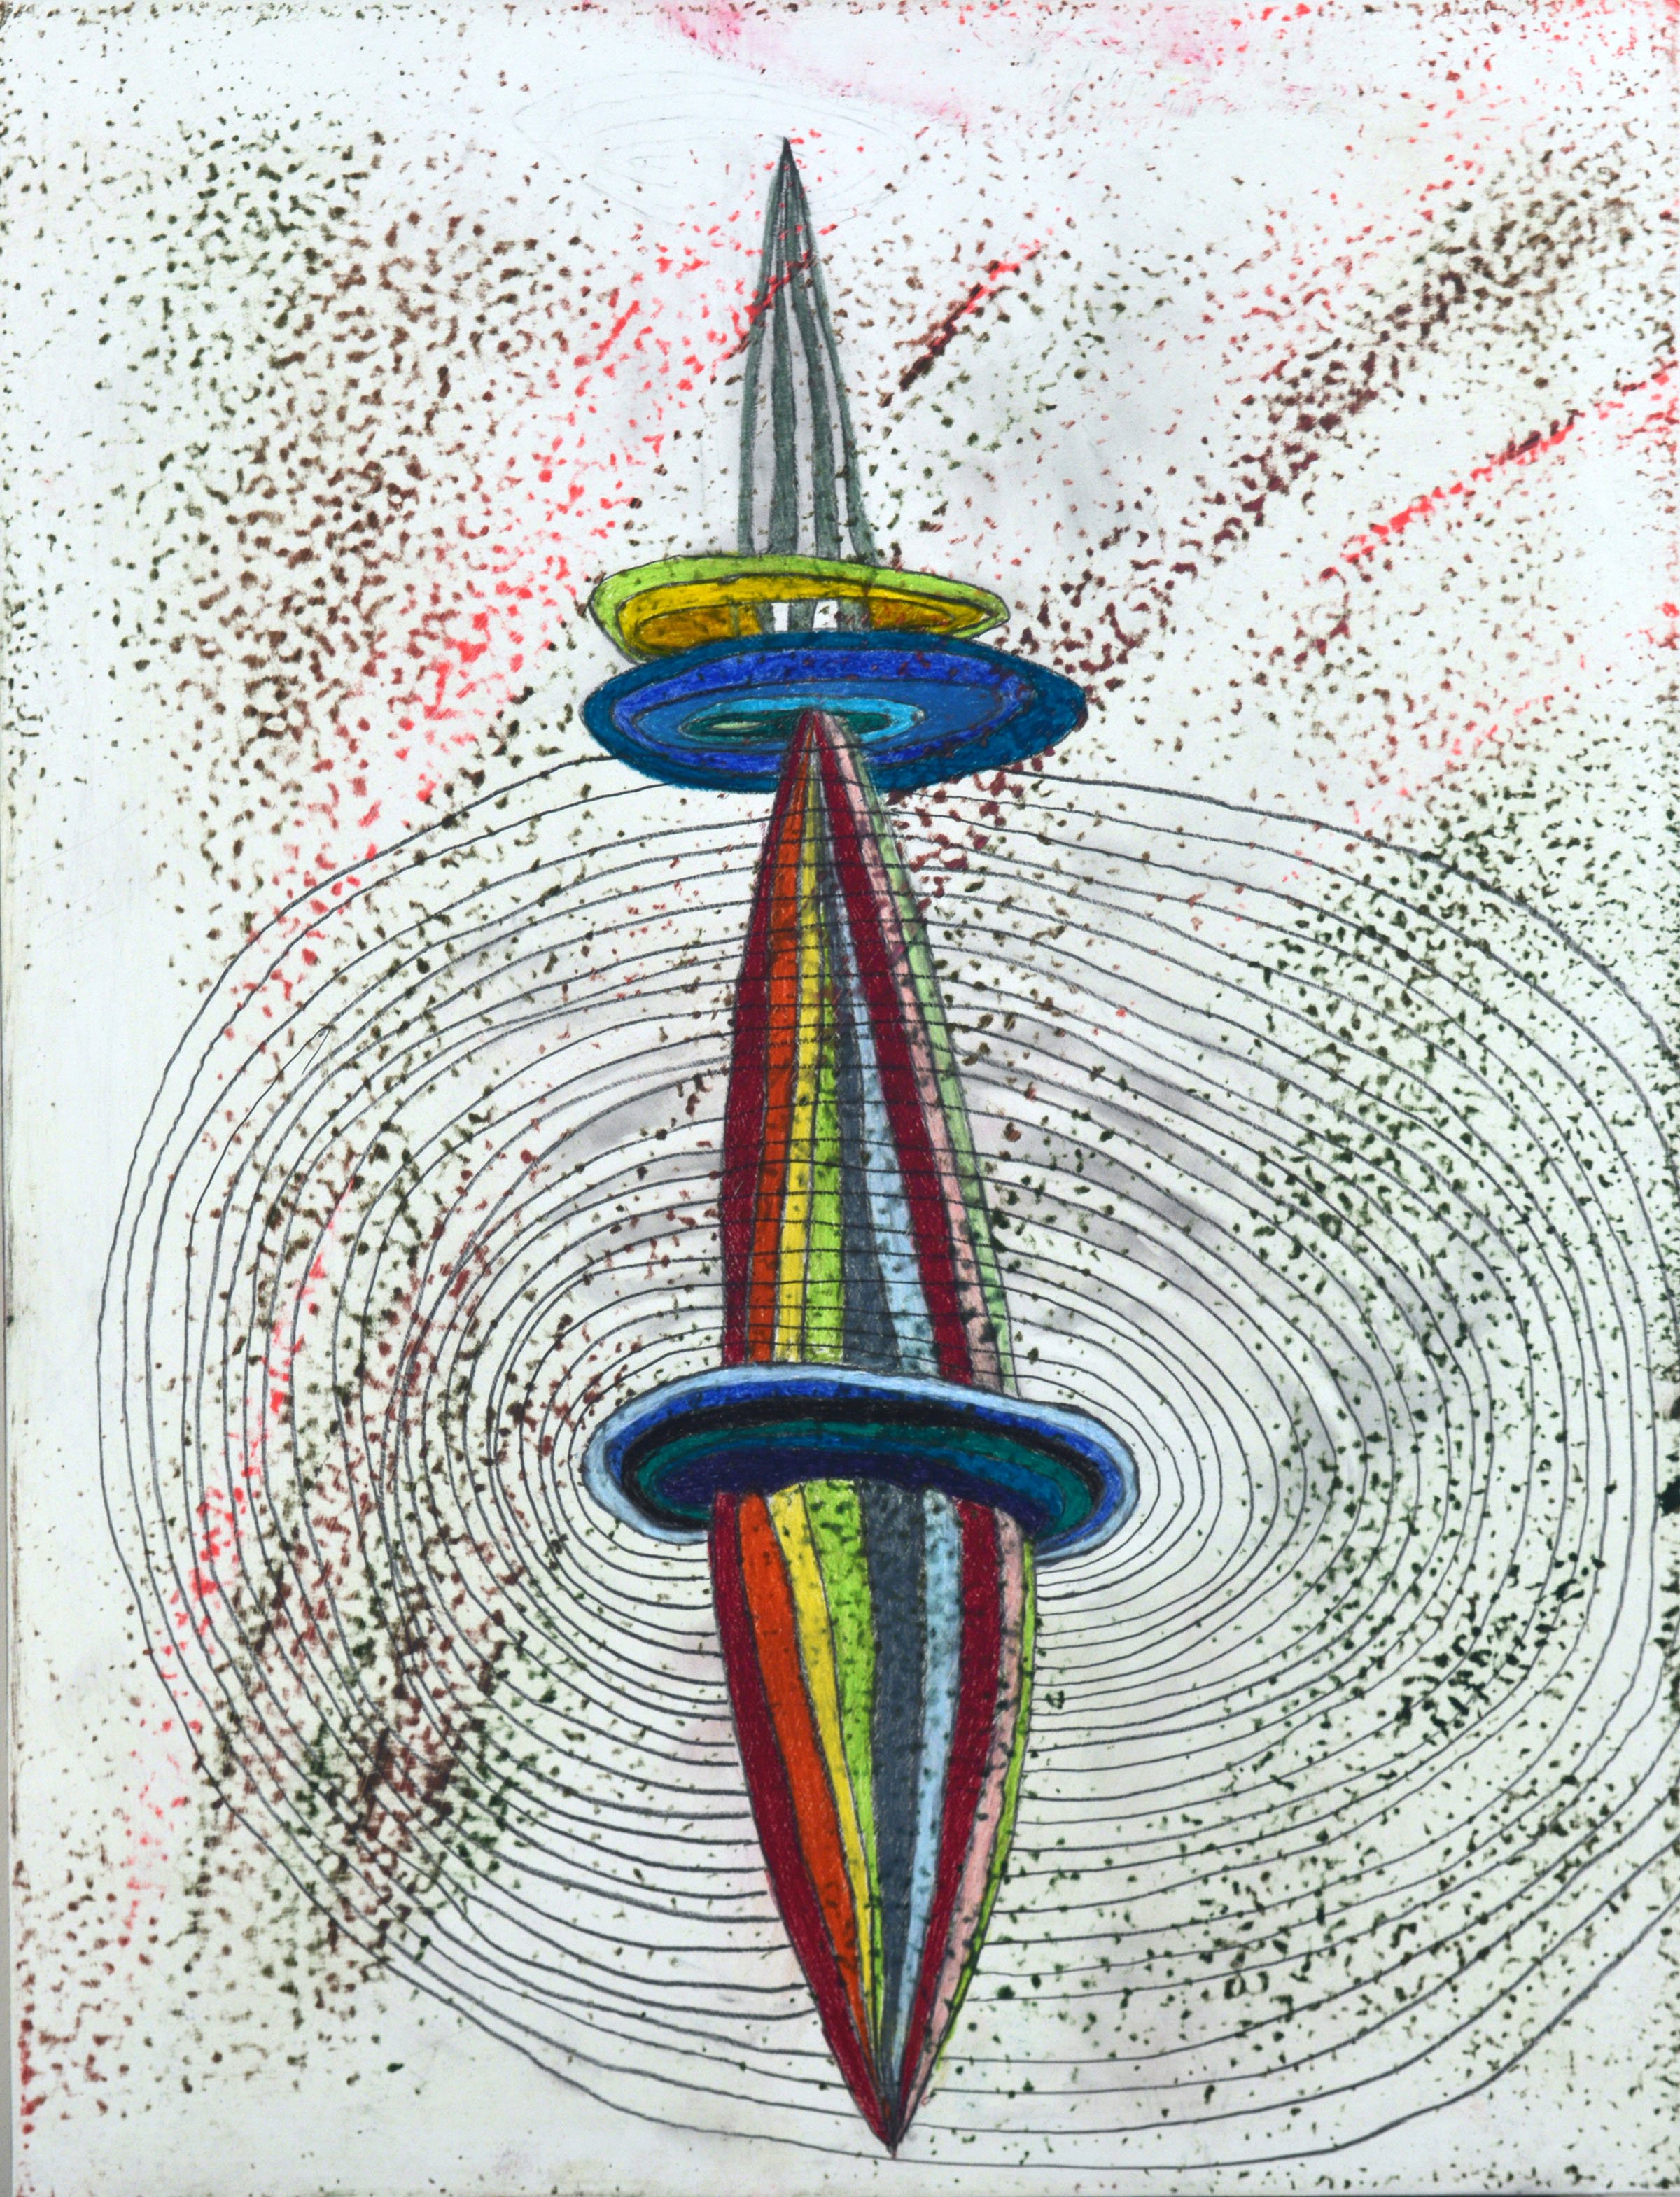  Ascent, 2020  oil, pencil, and colored pencil on panel, 20 x 15 inches (50.8 x 39.37 cm) 